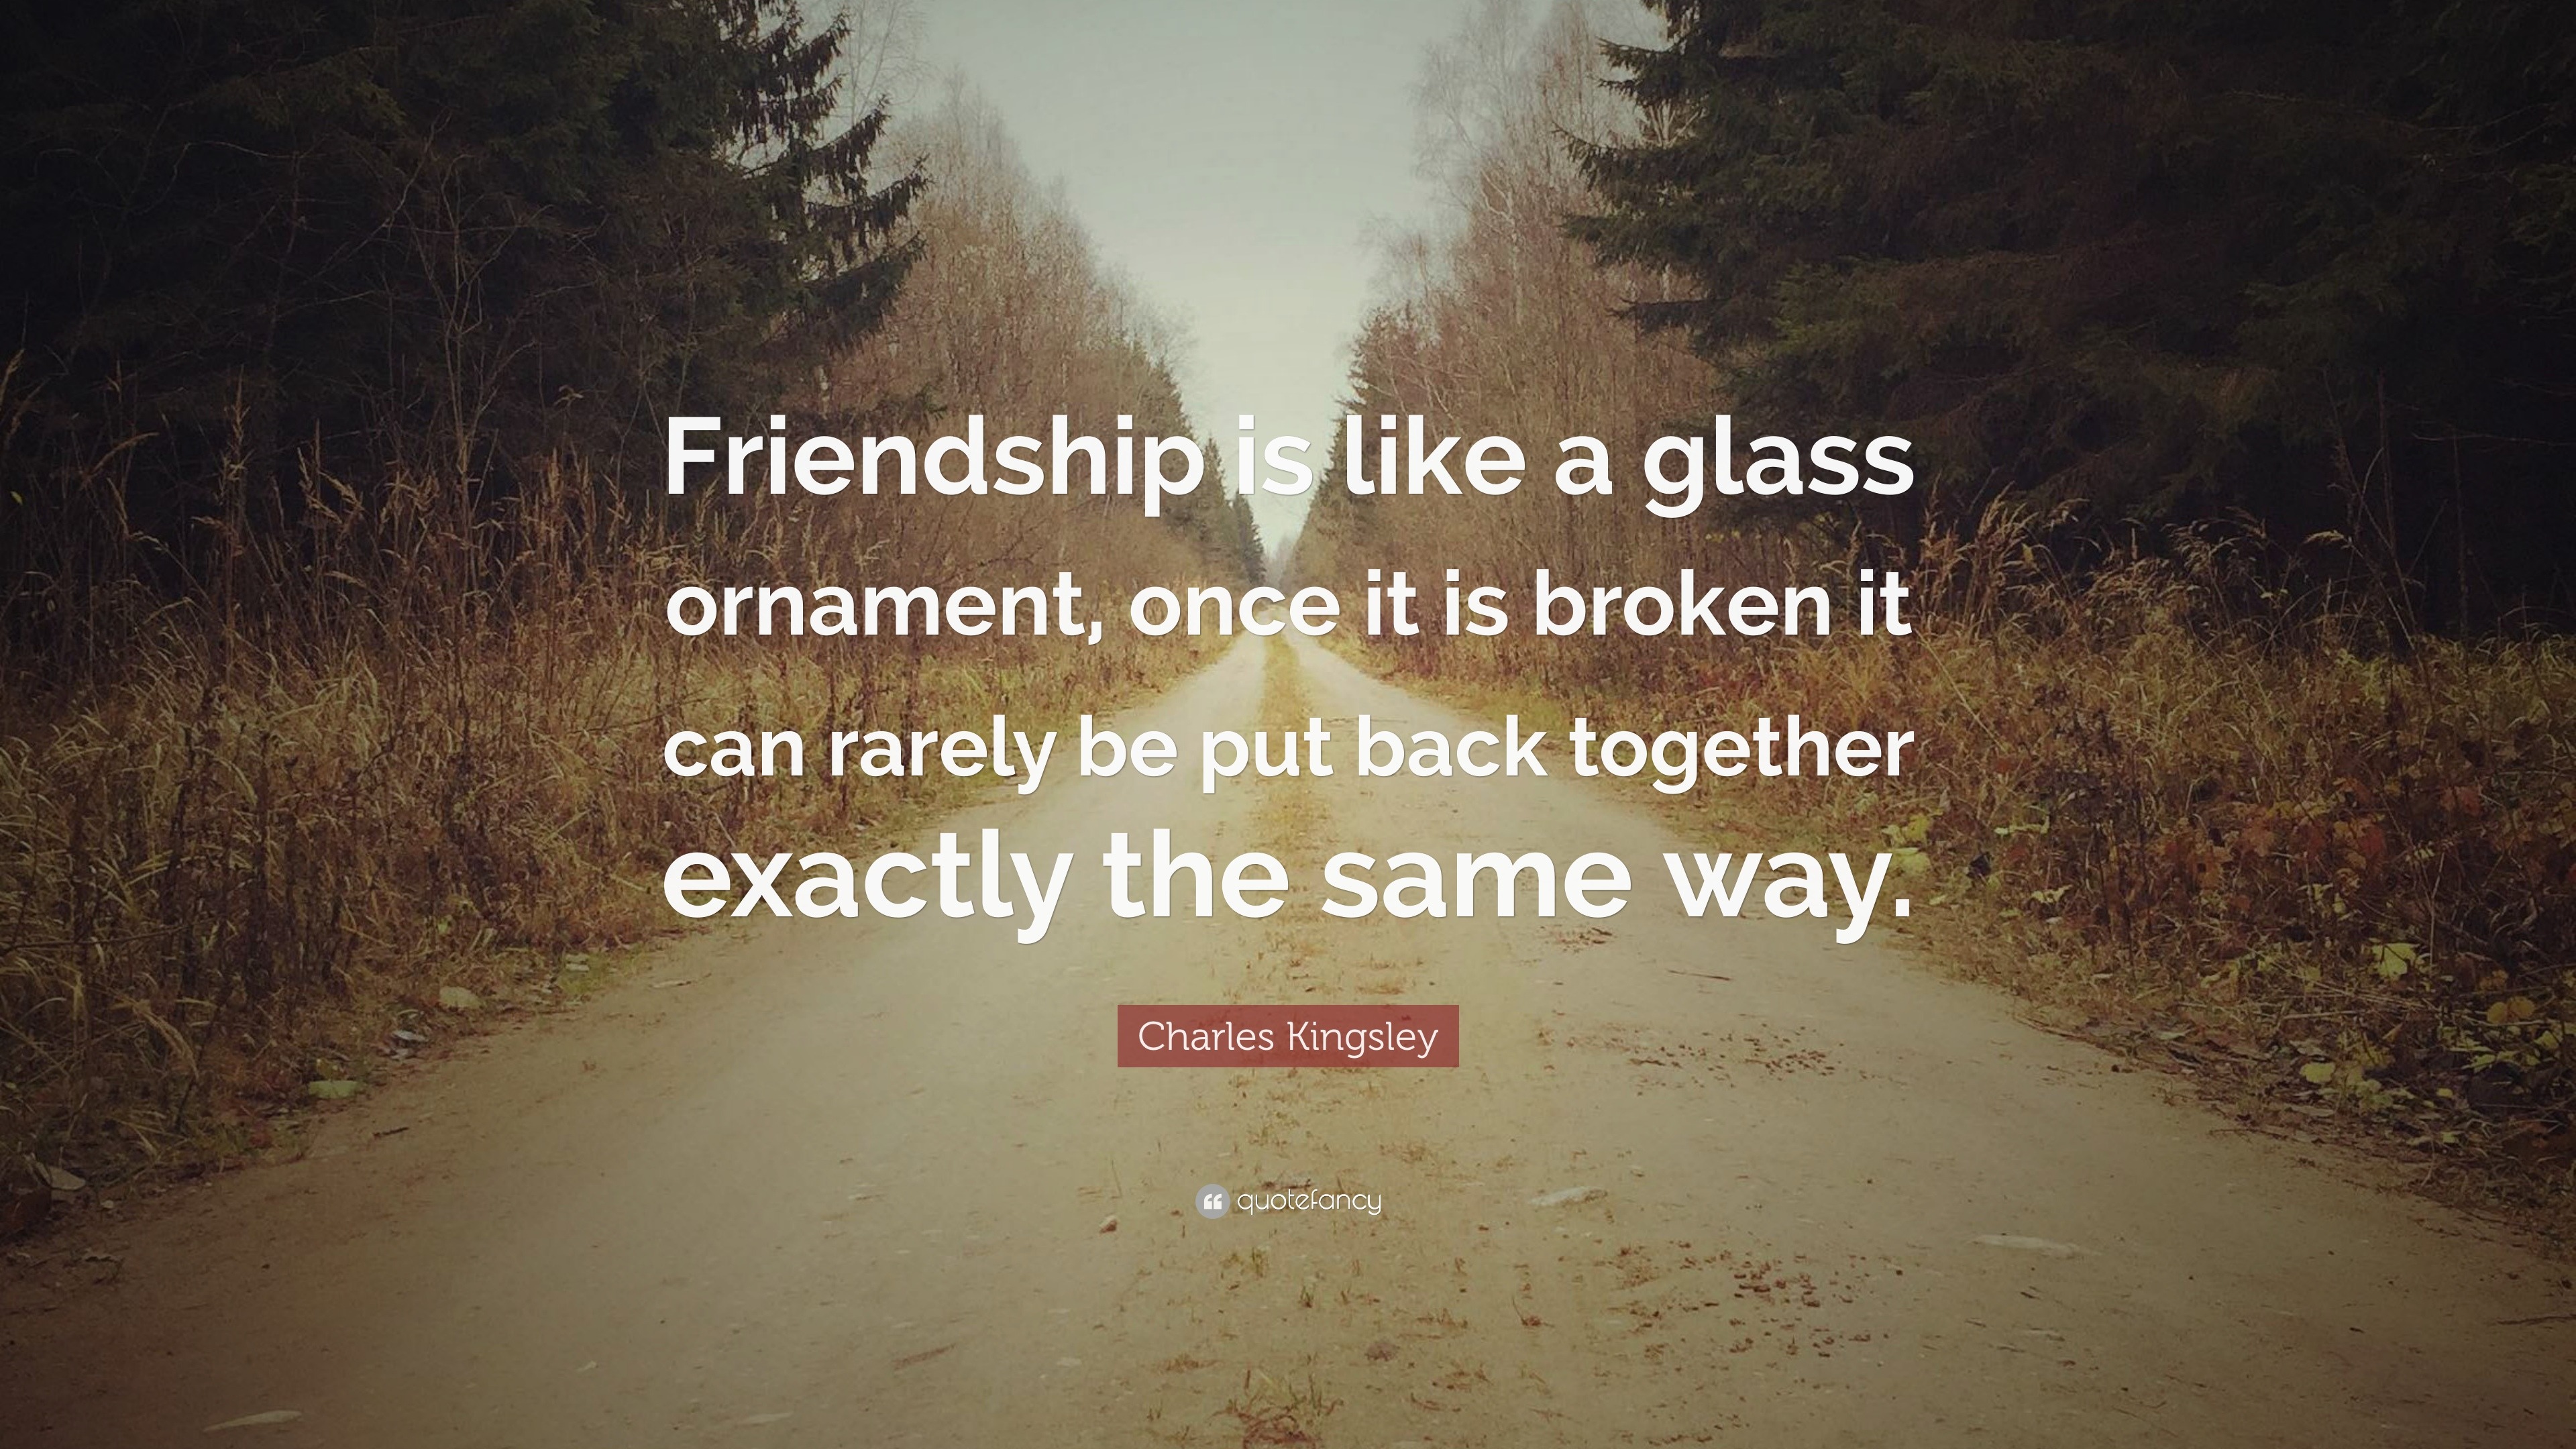 Charles Kingsley Quote: “Friendship is like a glass ornament, once it ...